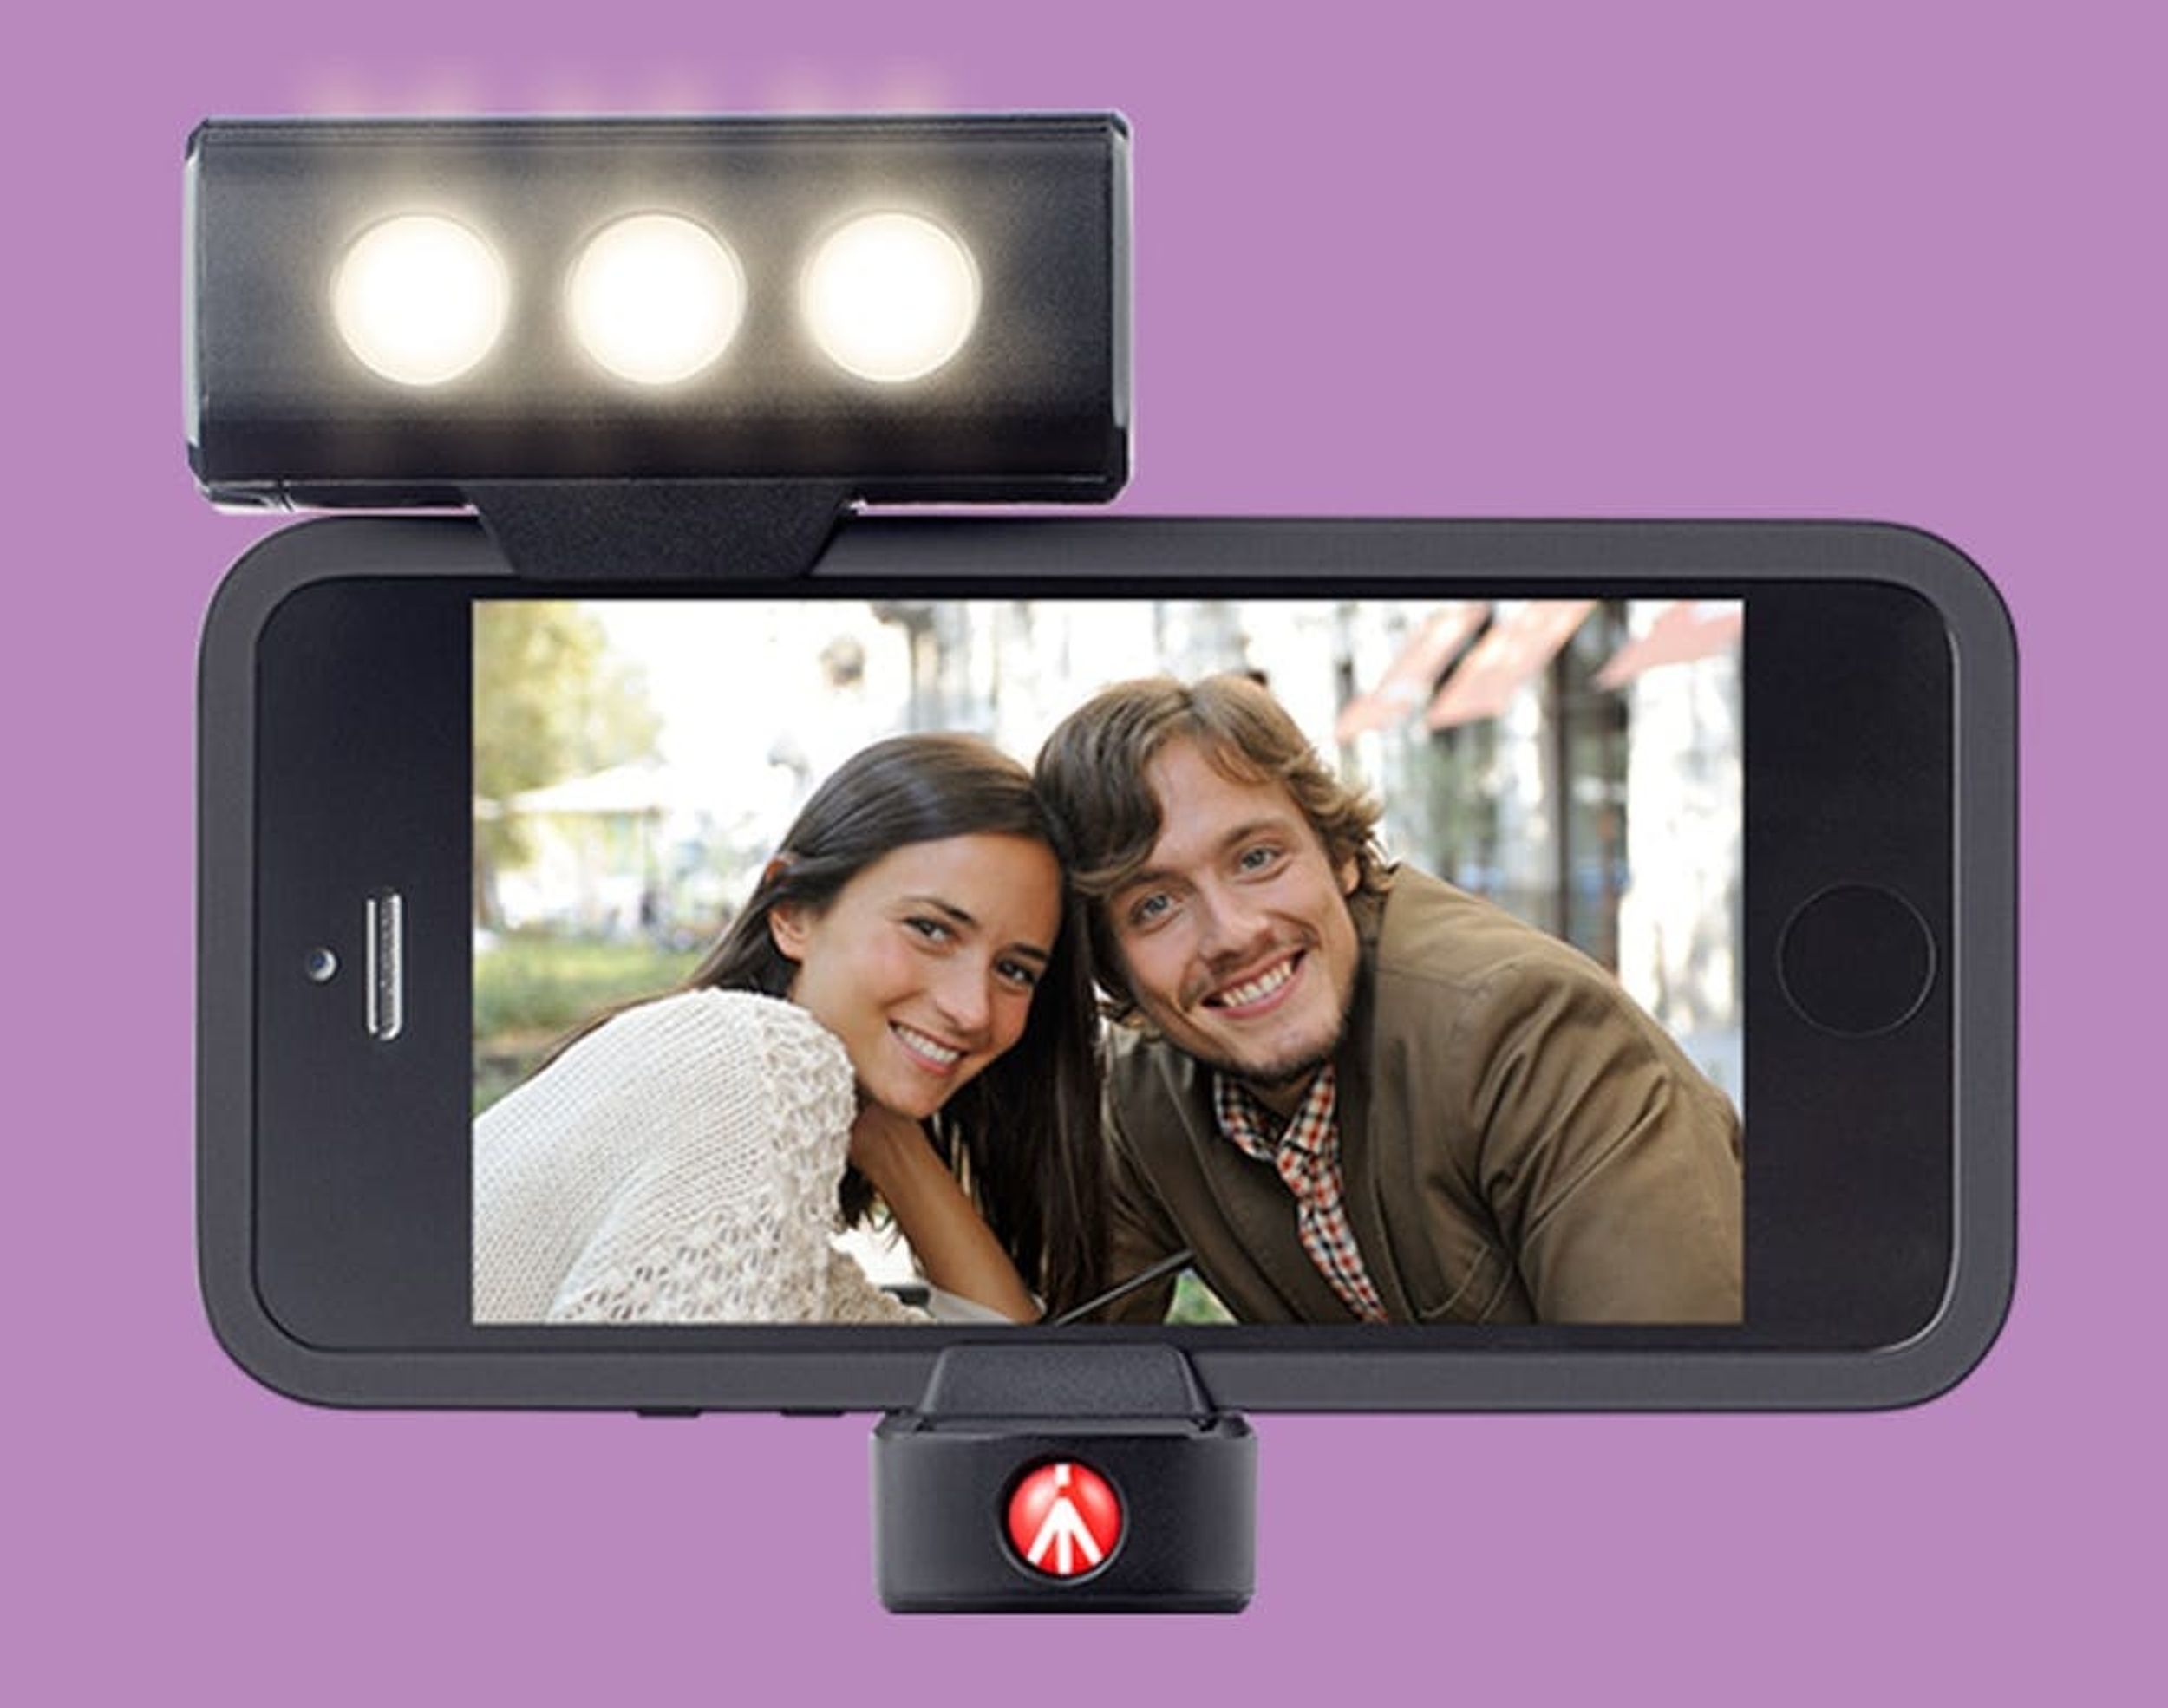 This Smartphone Case Turns Your iPhone Into a Portable Photo Studio